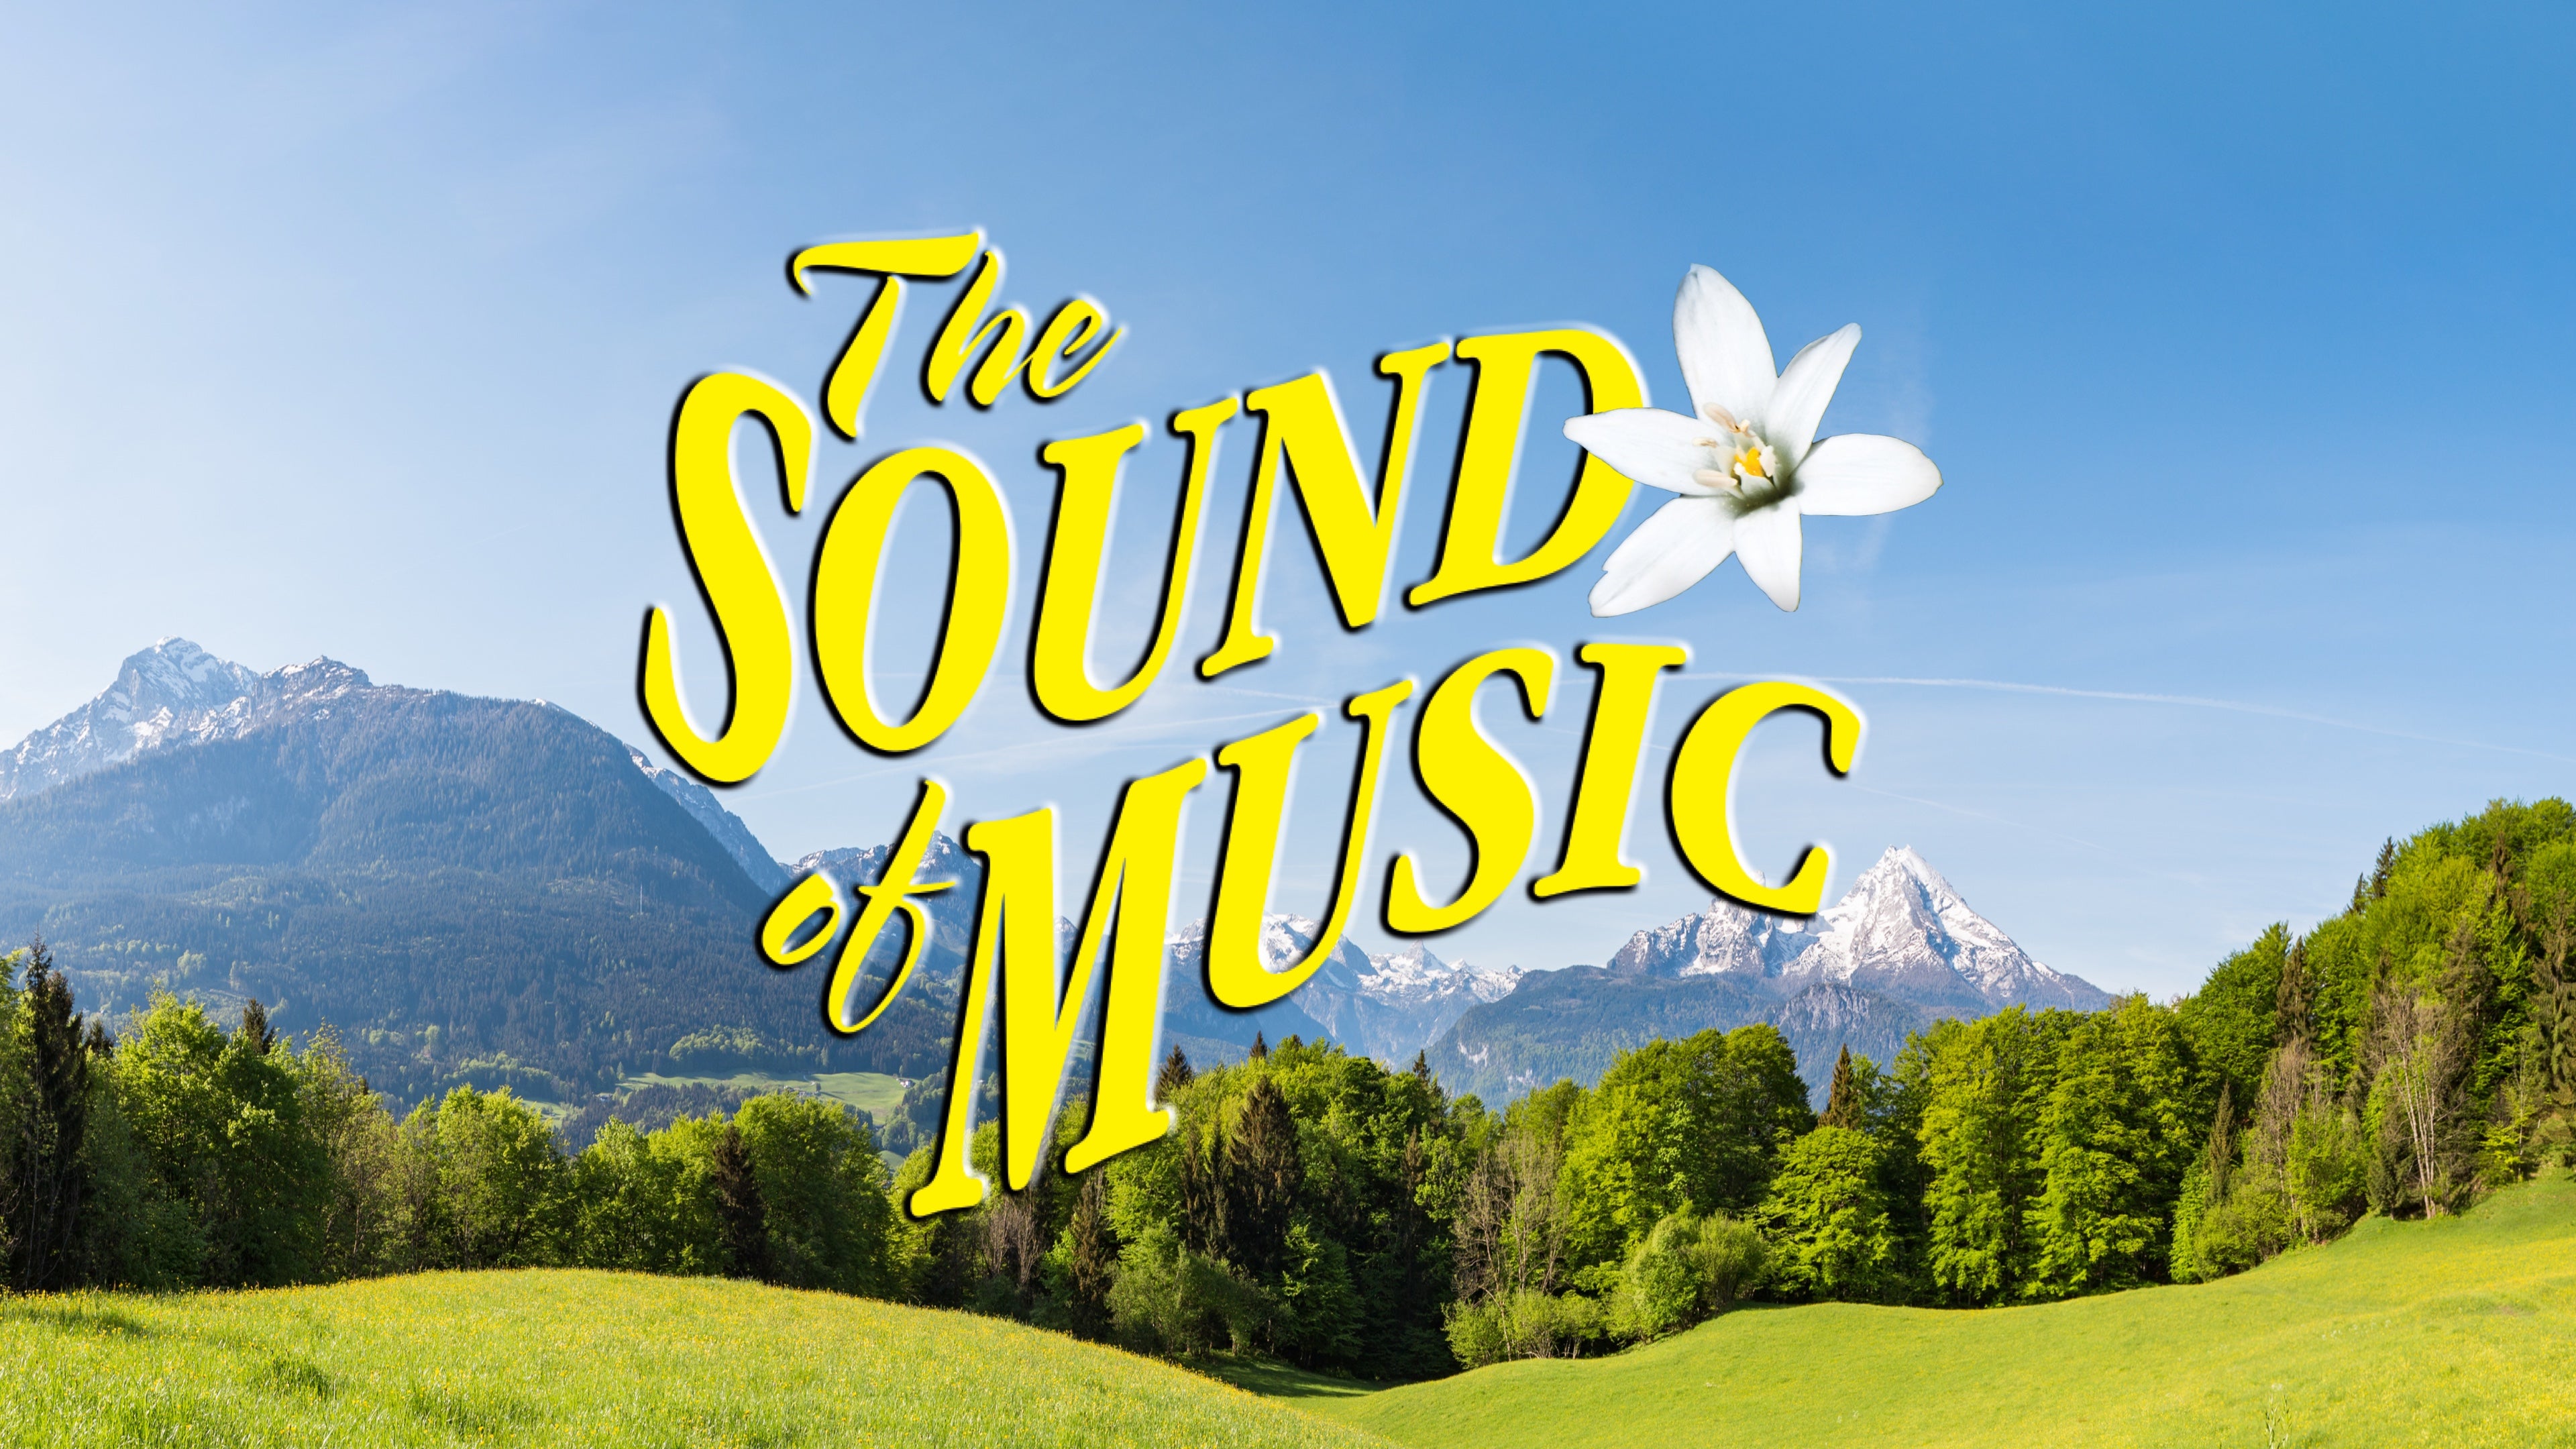 Main image for event titled 5 Star Theatricals presents The Sound of Music